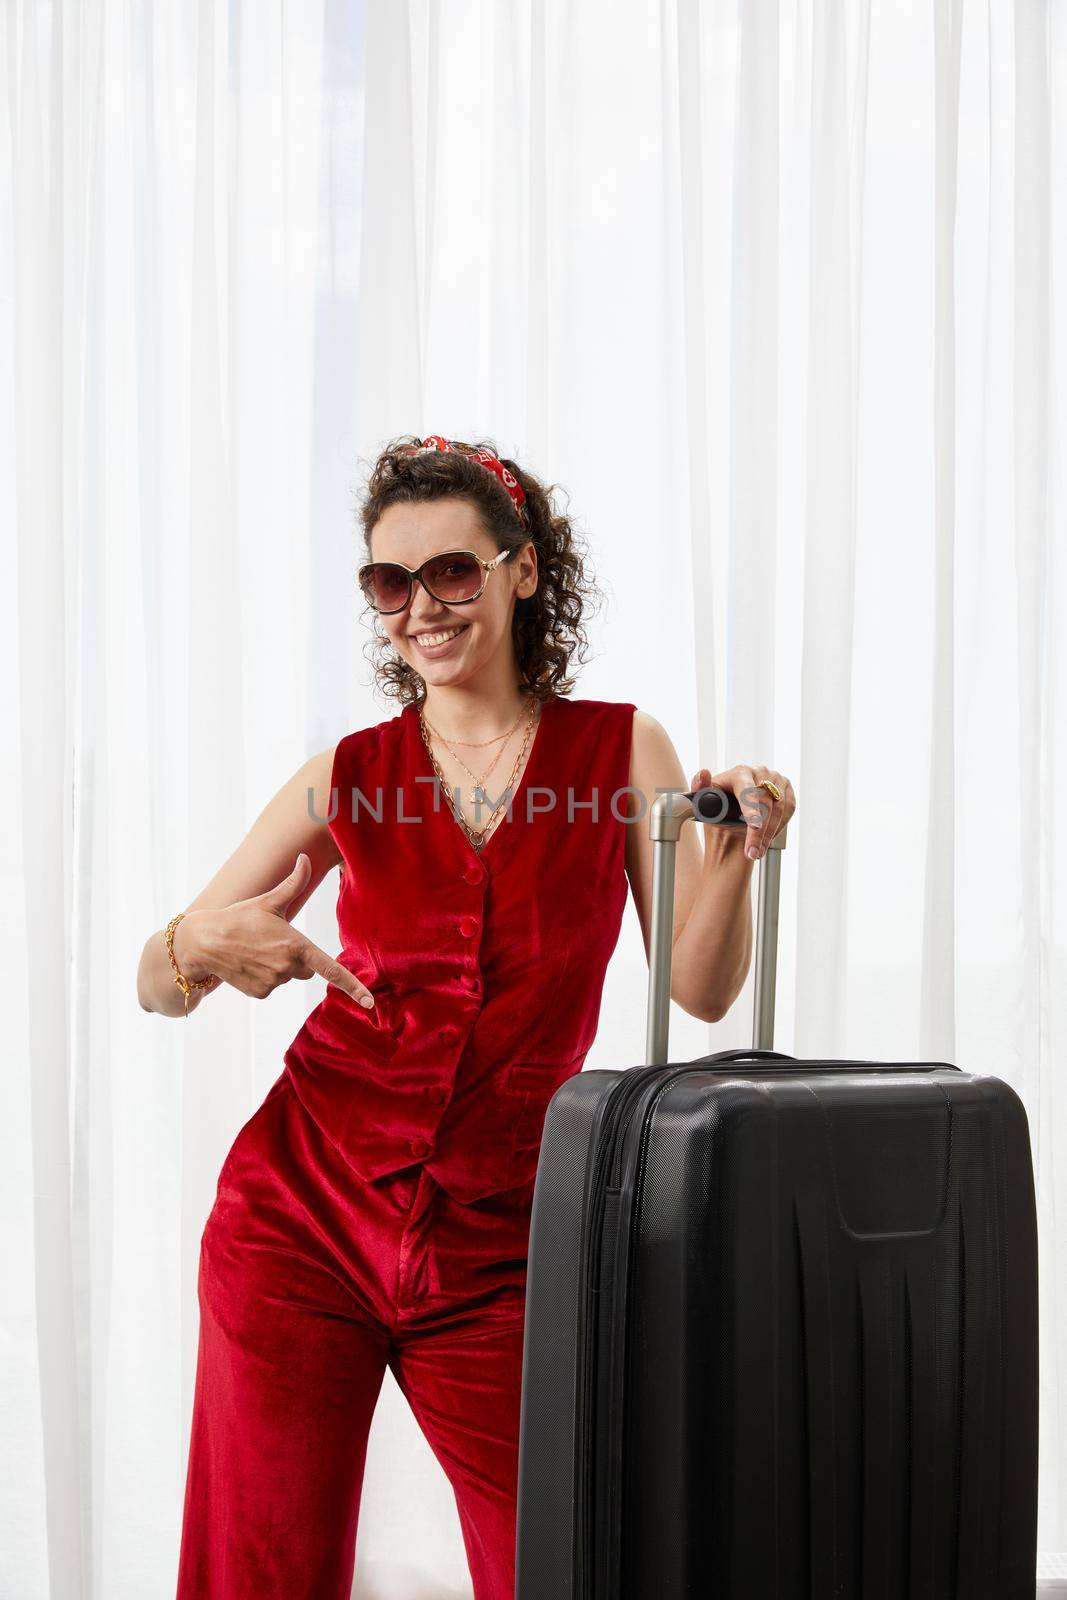 Glamour young woman wearing red velvet suit standing smiling with suitcase in hotel room